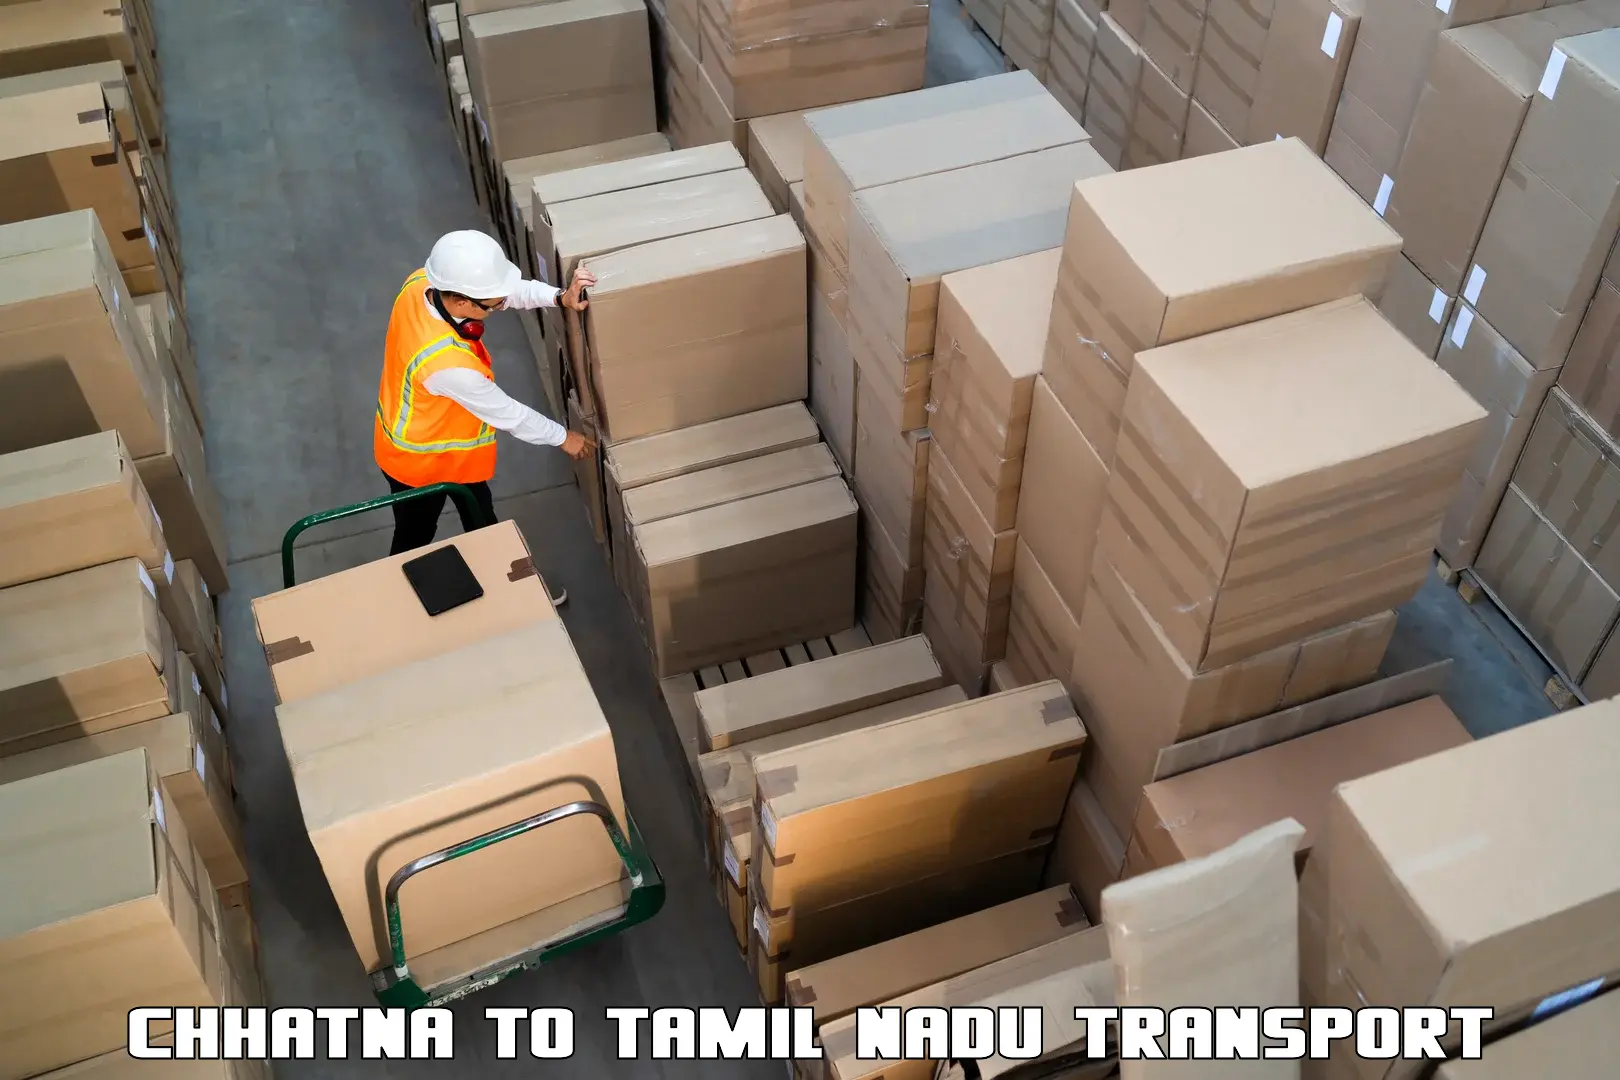 Parcel transport services Chhatna to Ennore Port Chennai